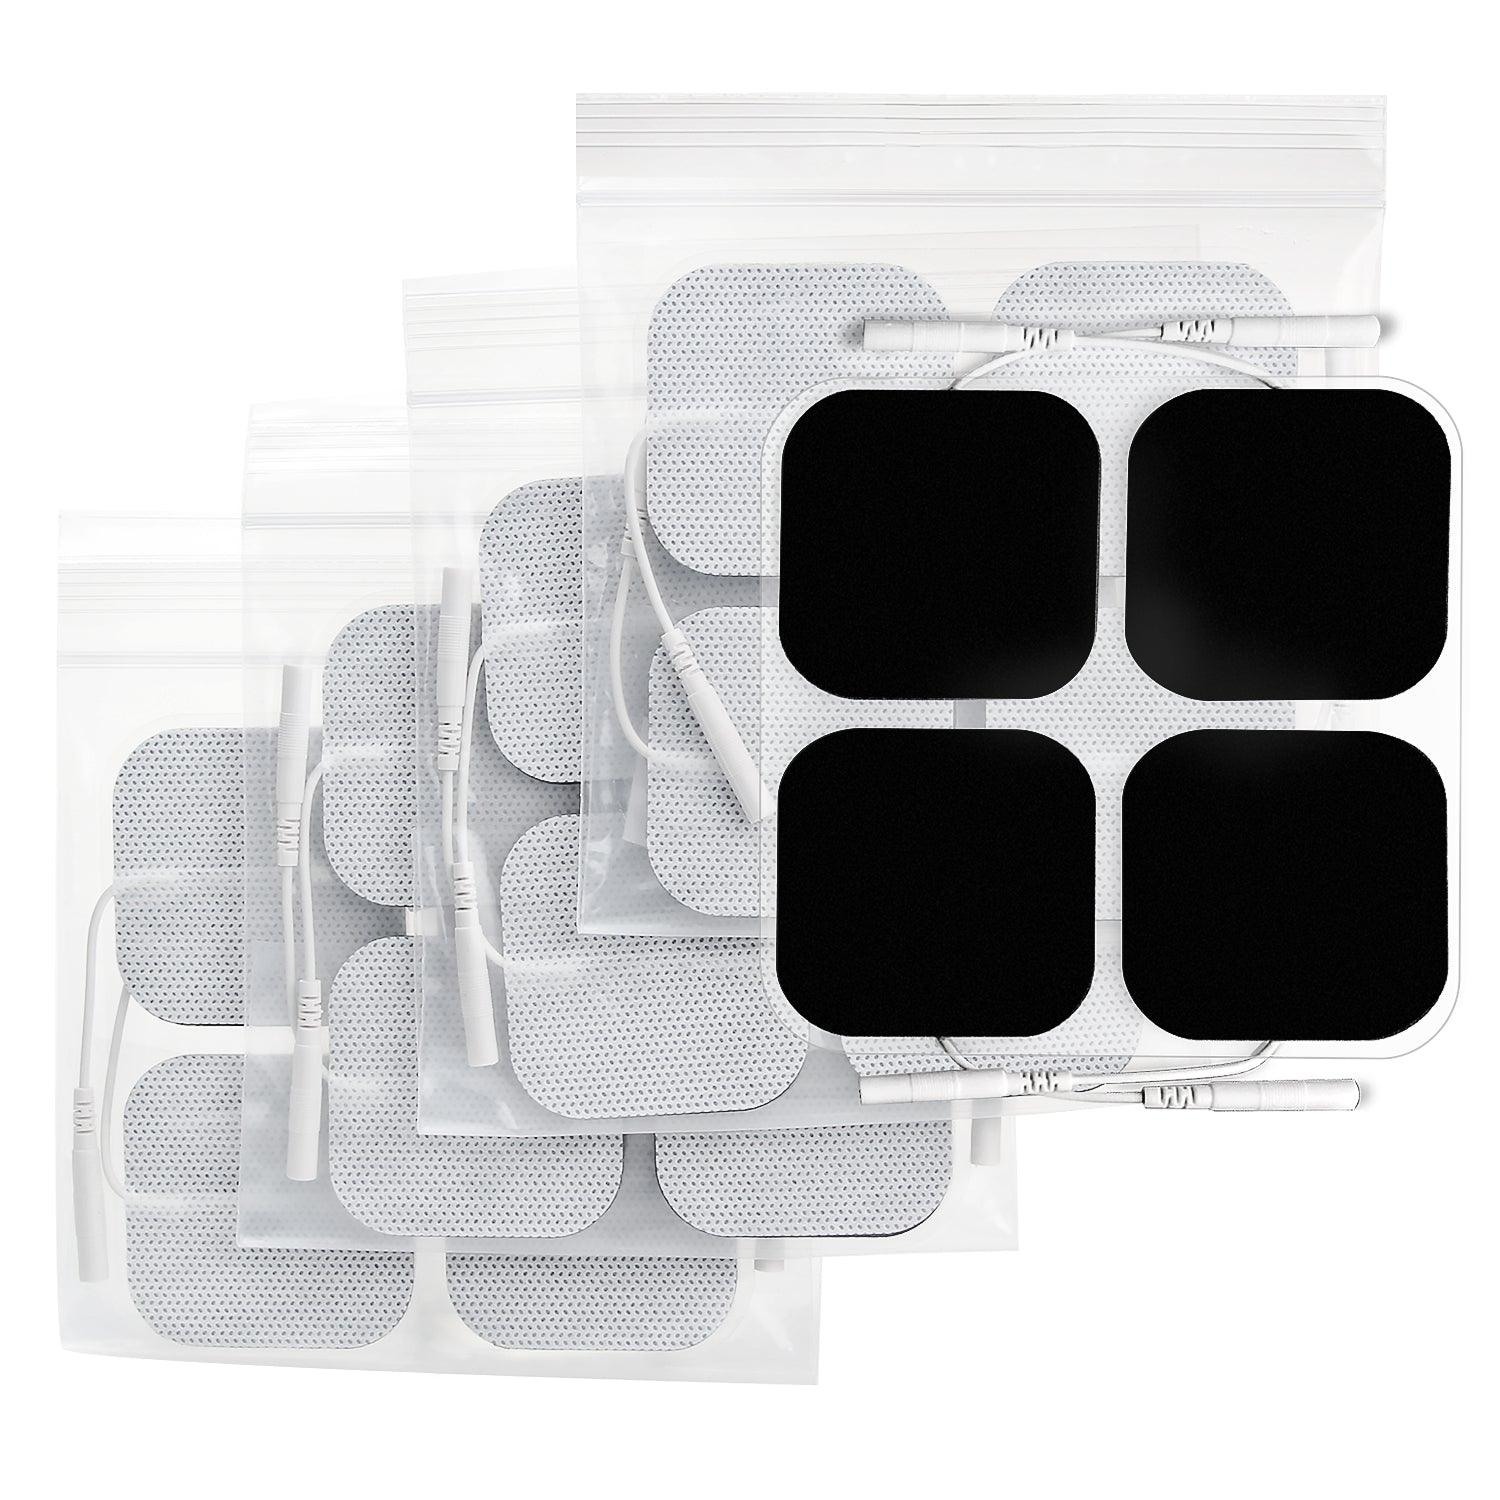 AUVON TENS Unit Pads 2X4 10 Pcs, 3rd Gen Latex-Free Rectangular  Replacement Pads Electrode Patches with Upgraded Self-Stick Performance for  Electrotherapy A-white 